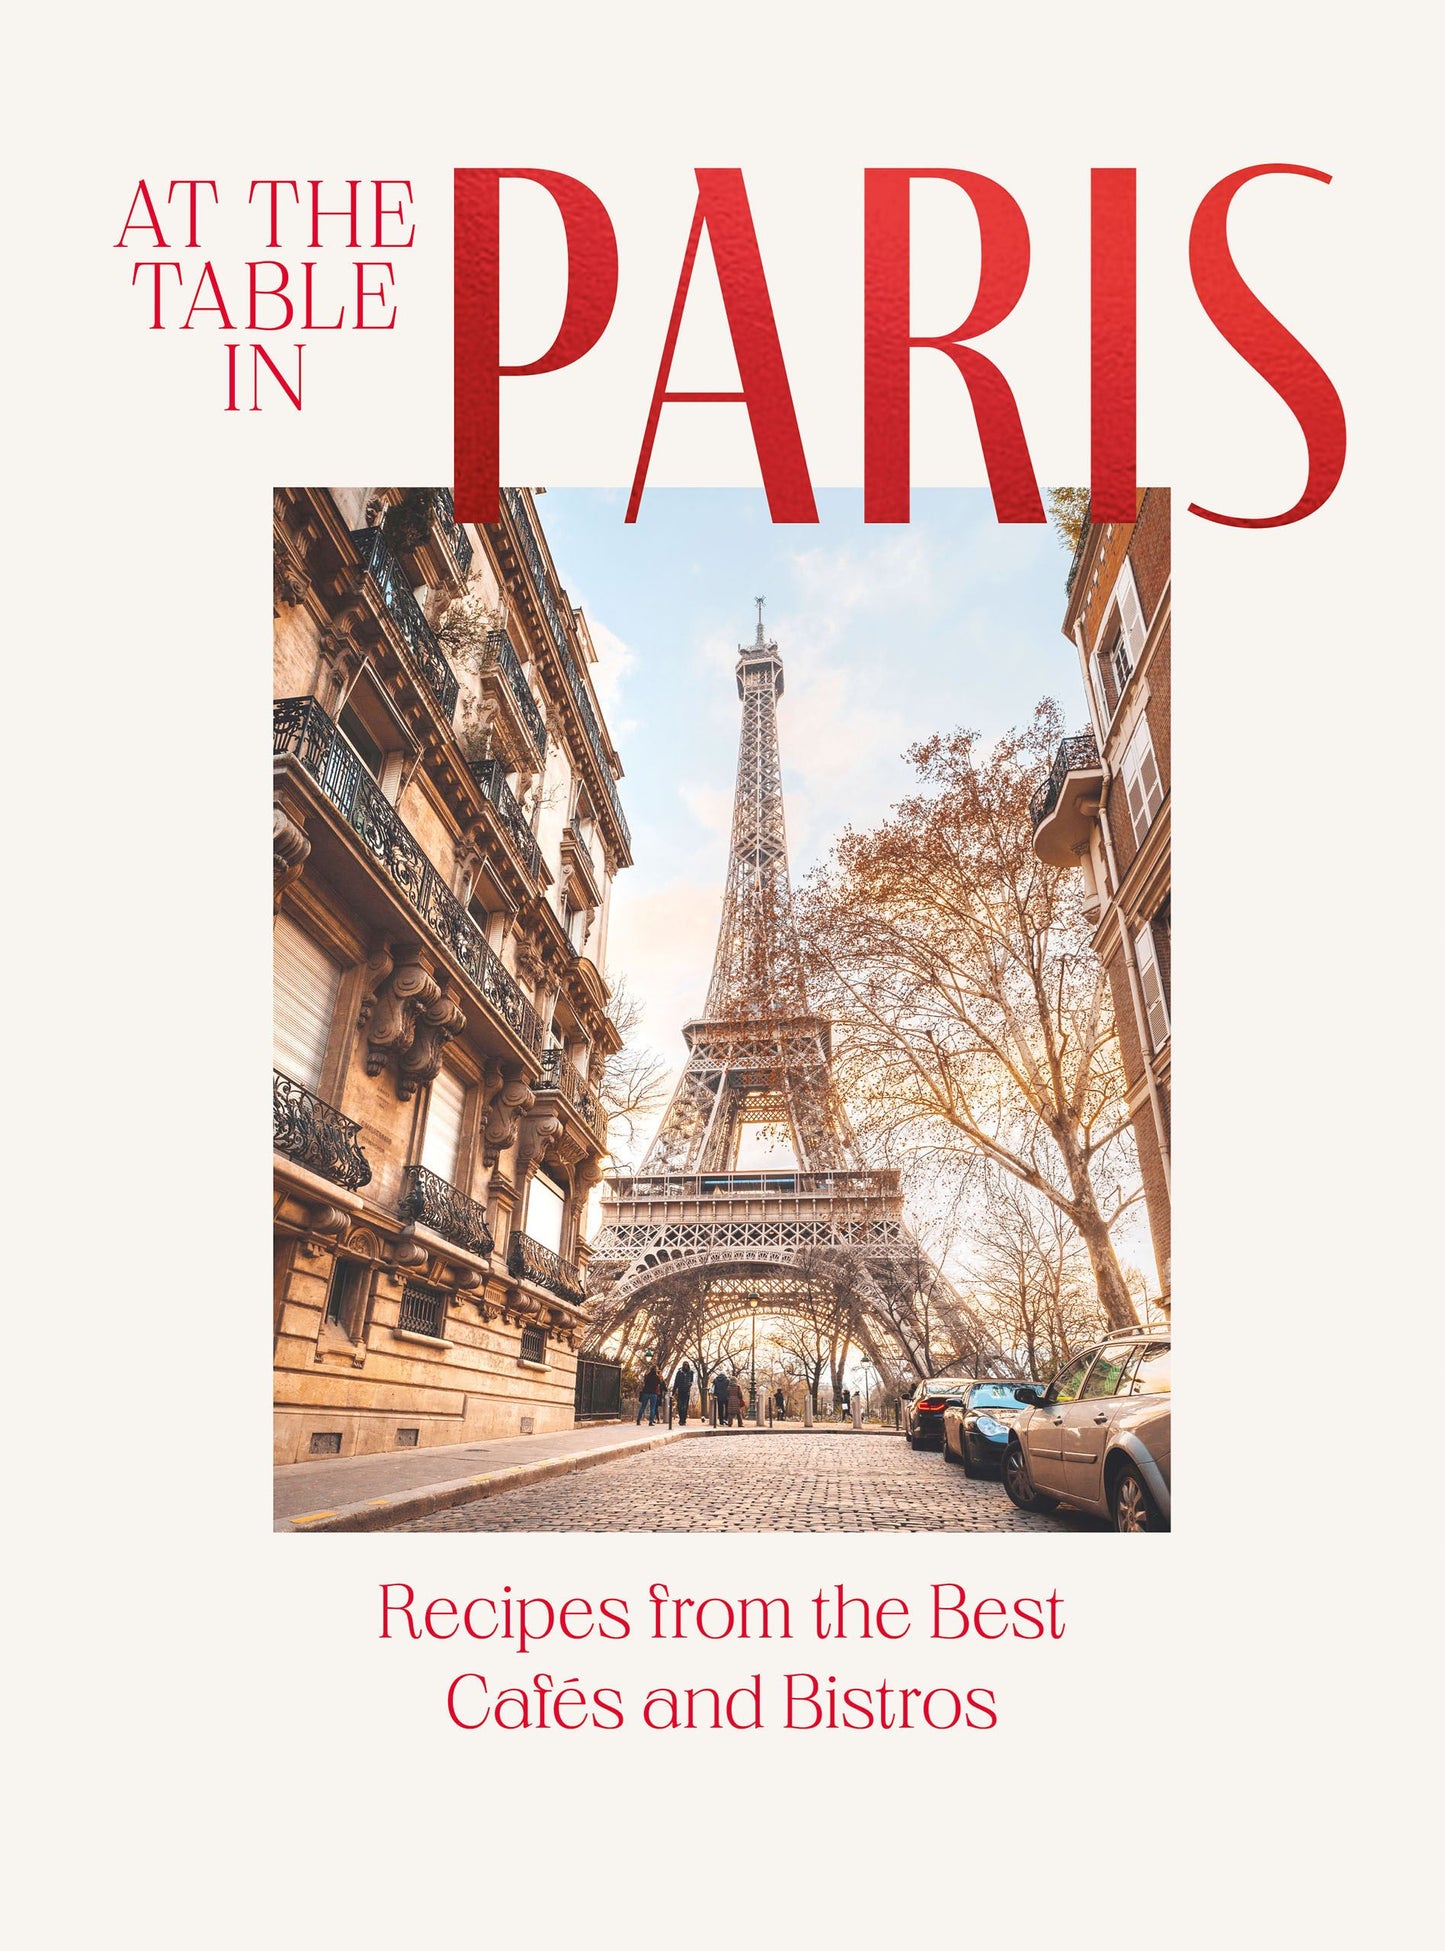 At the table in Paris - Recipes from cafes and bistros